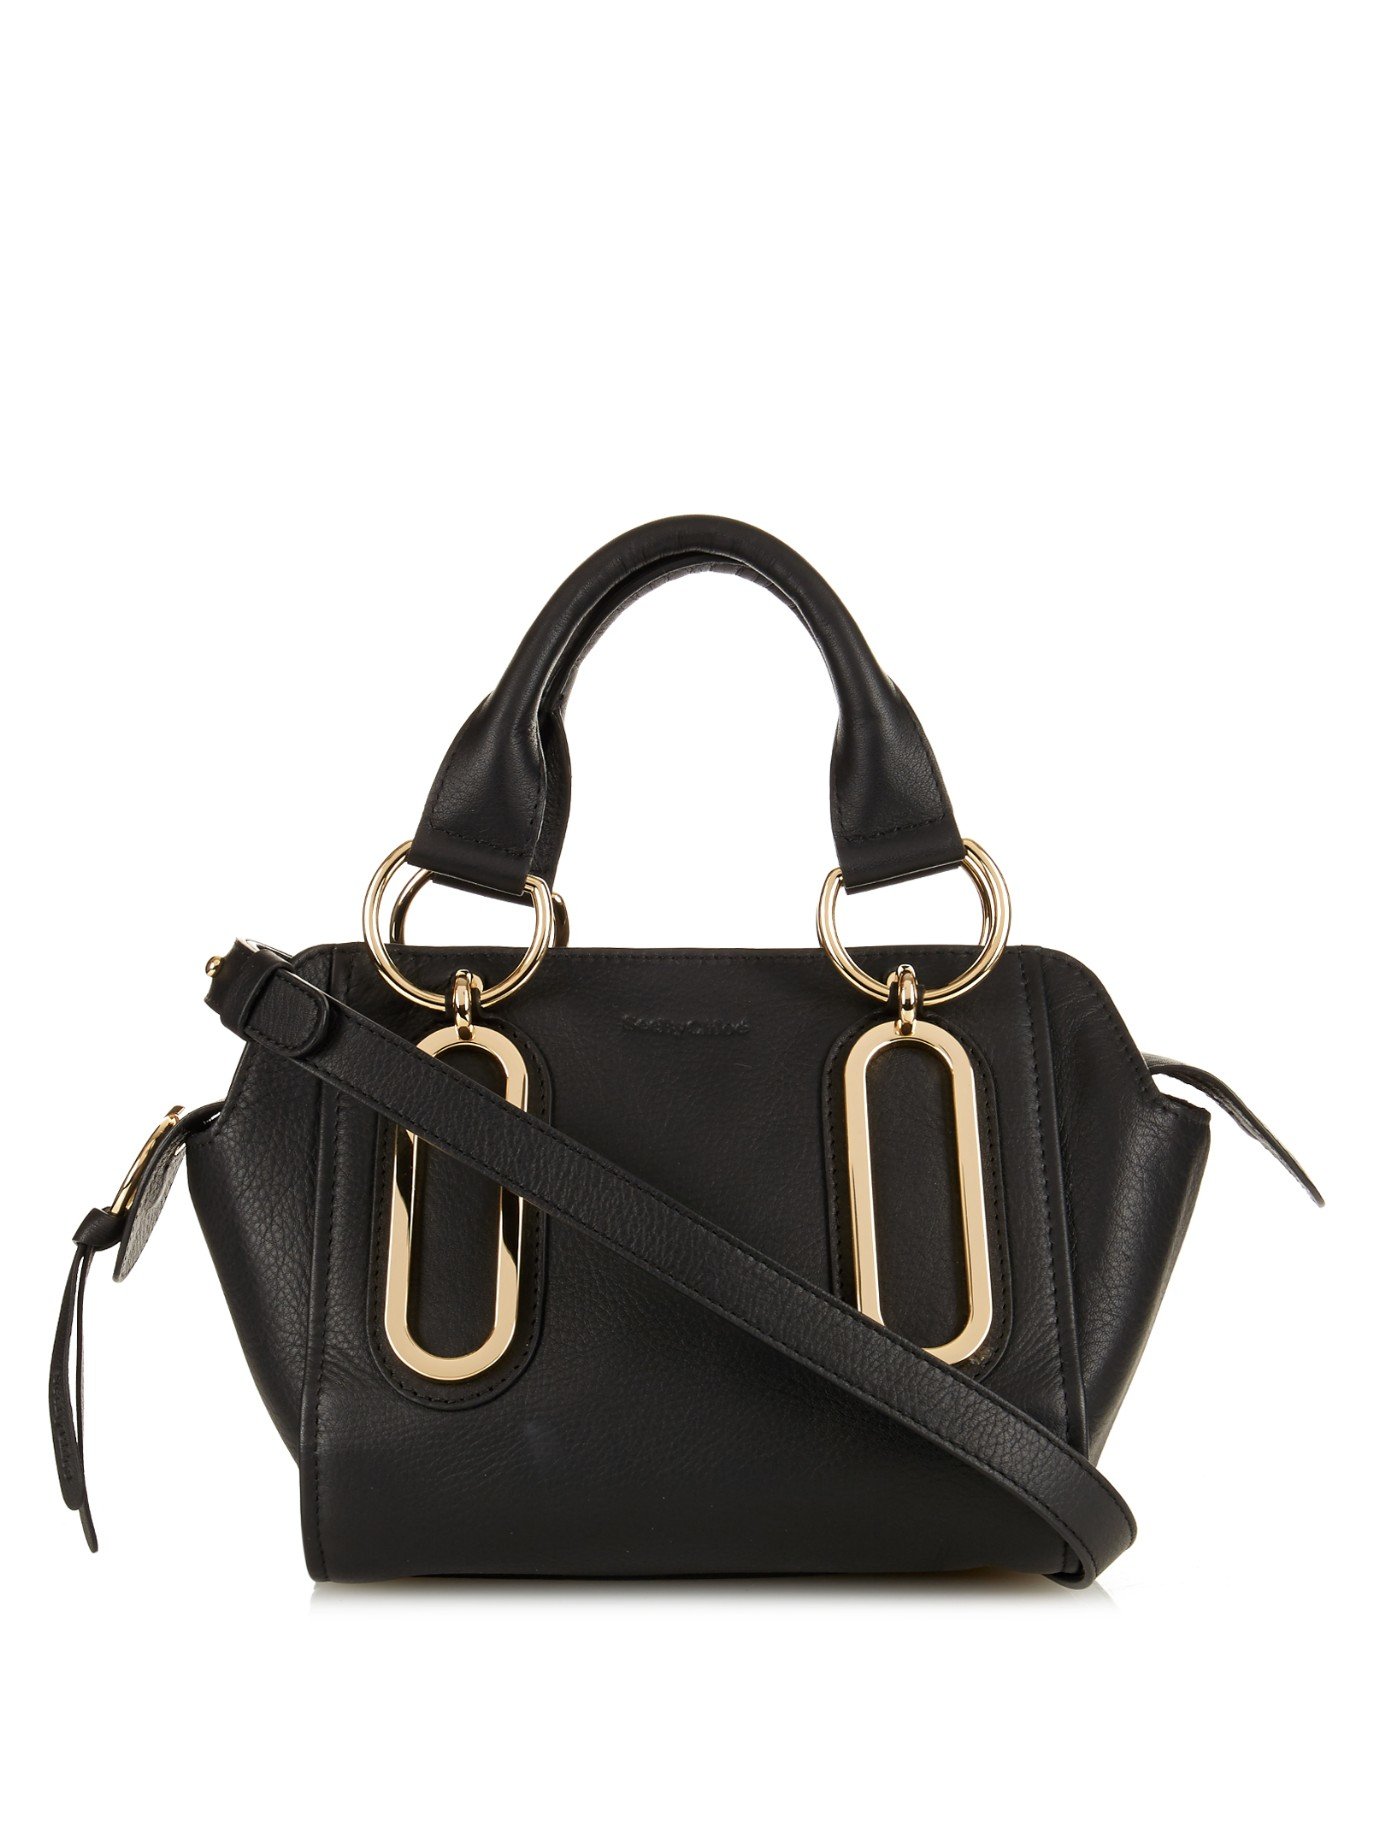 See By Chloé Paige Mini Leather Shoulder Bag in Black | Lyst